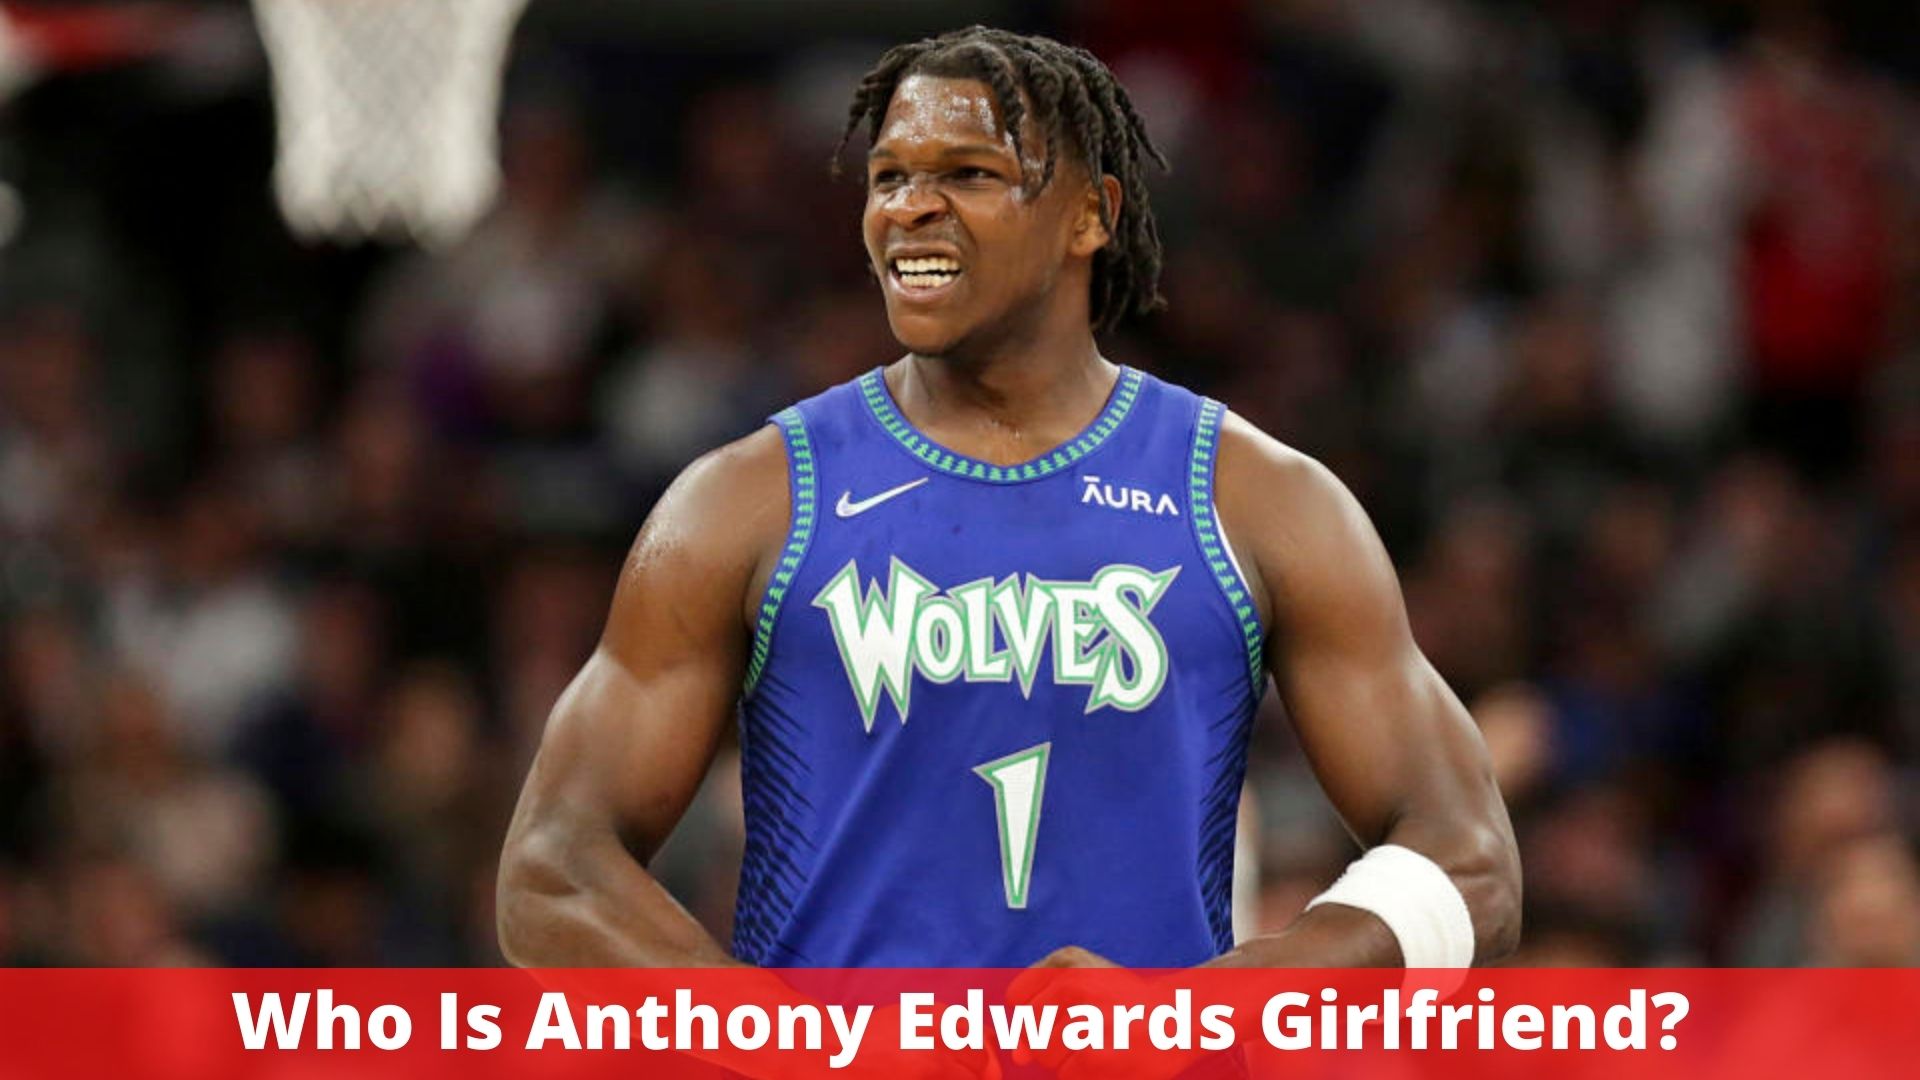 Who Is Anthony Edwards Girlfriend?